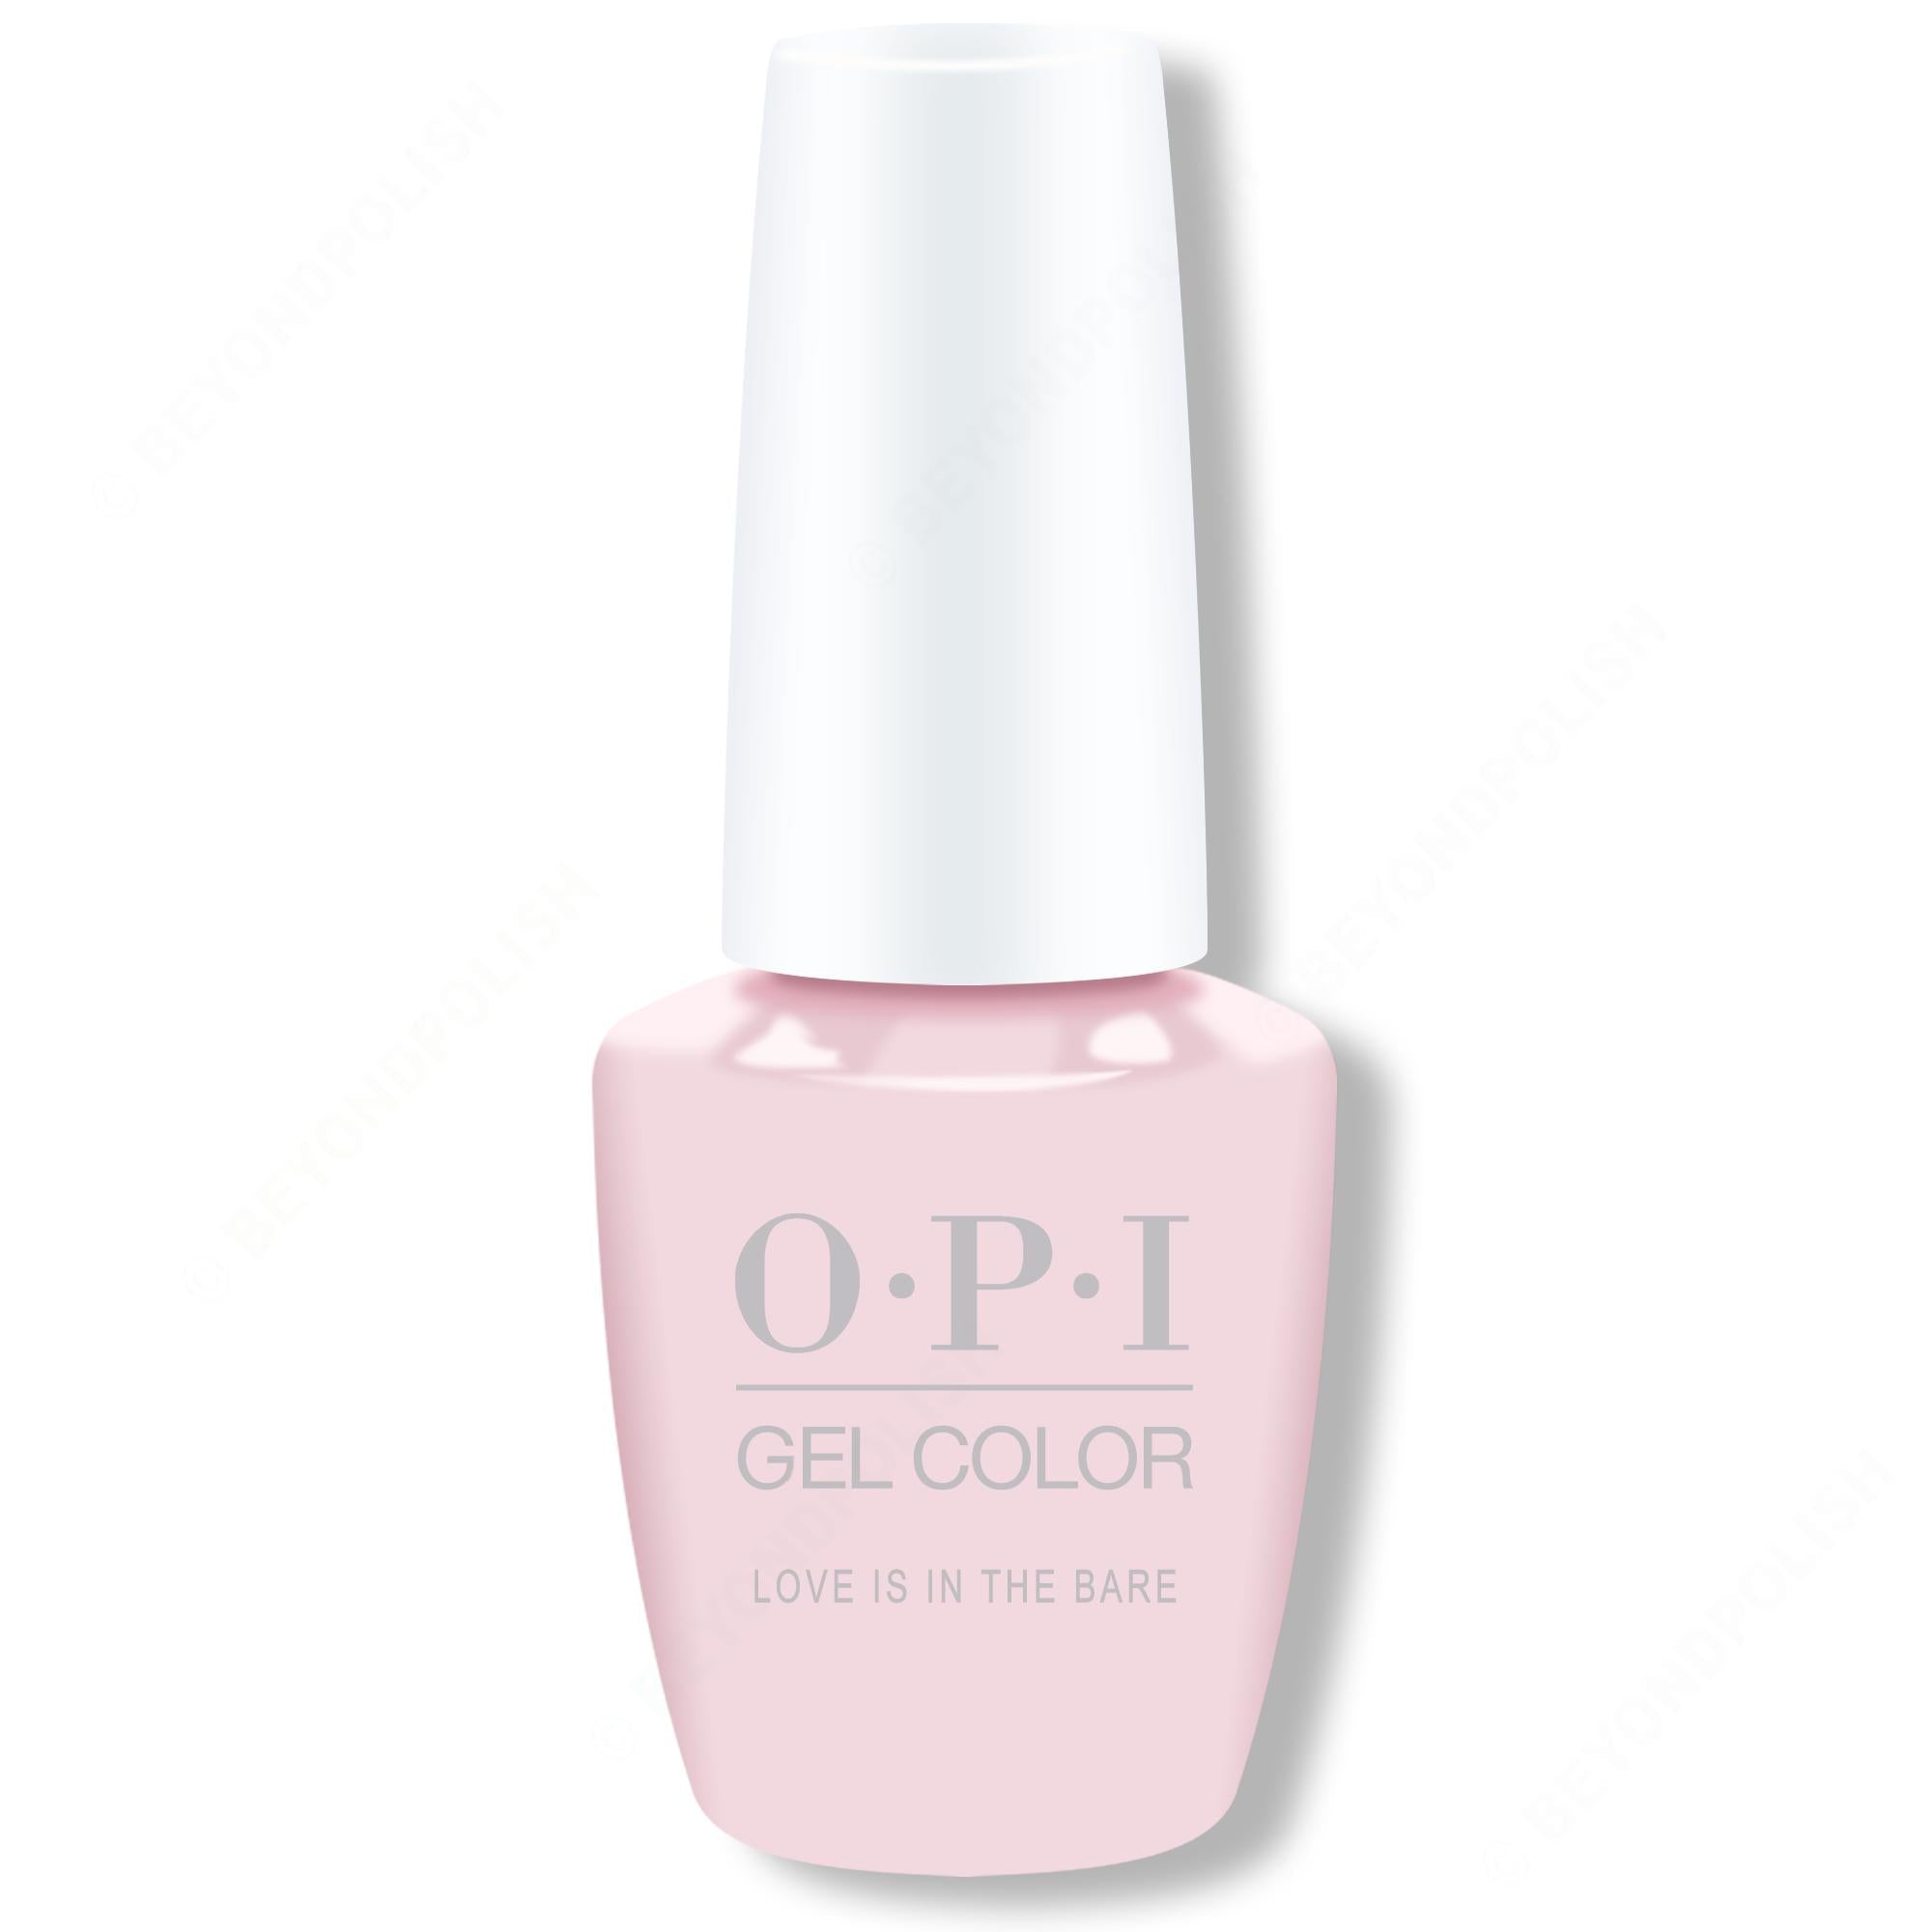 DeBelle Gel Nail Lacquer Peony Blossom Nude Nail Polish 8 ml Online in  India, Buy at Best Price from Firstcry.com - 12696276